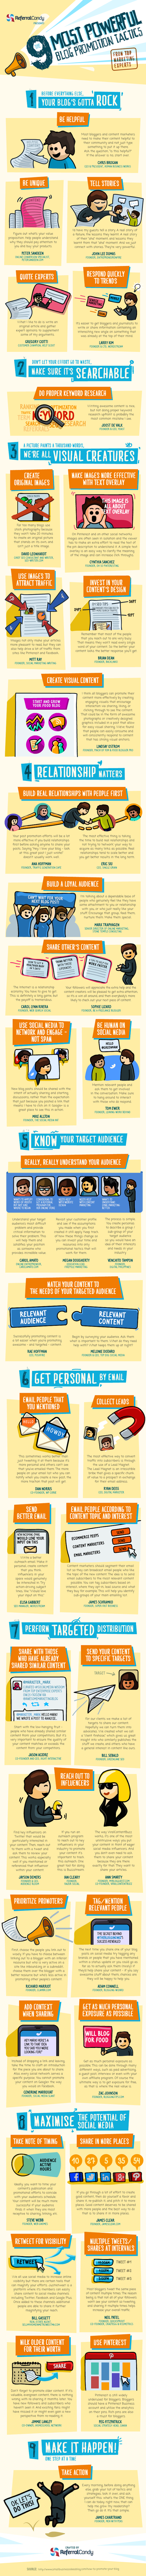 blog promotion infographic